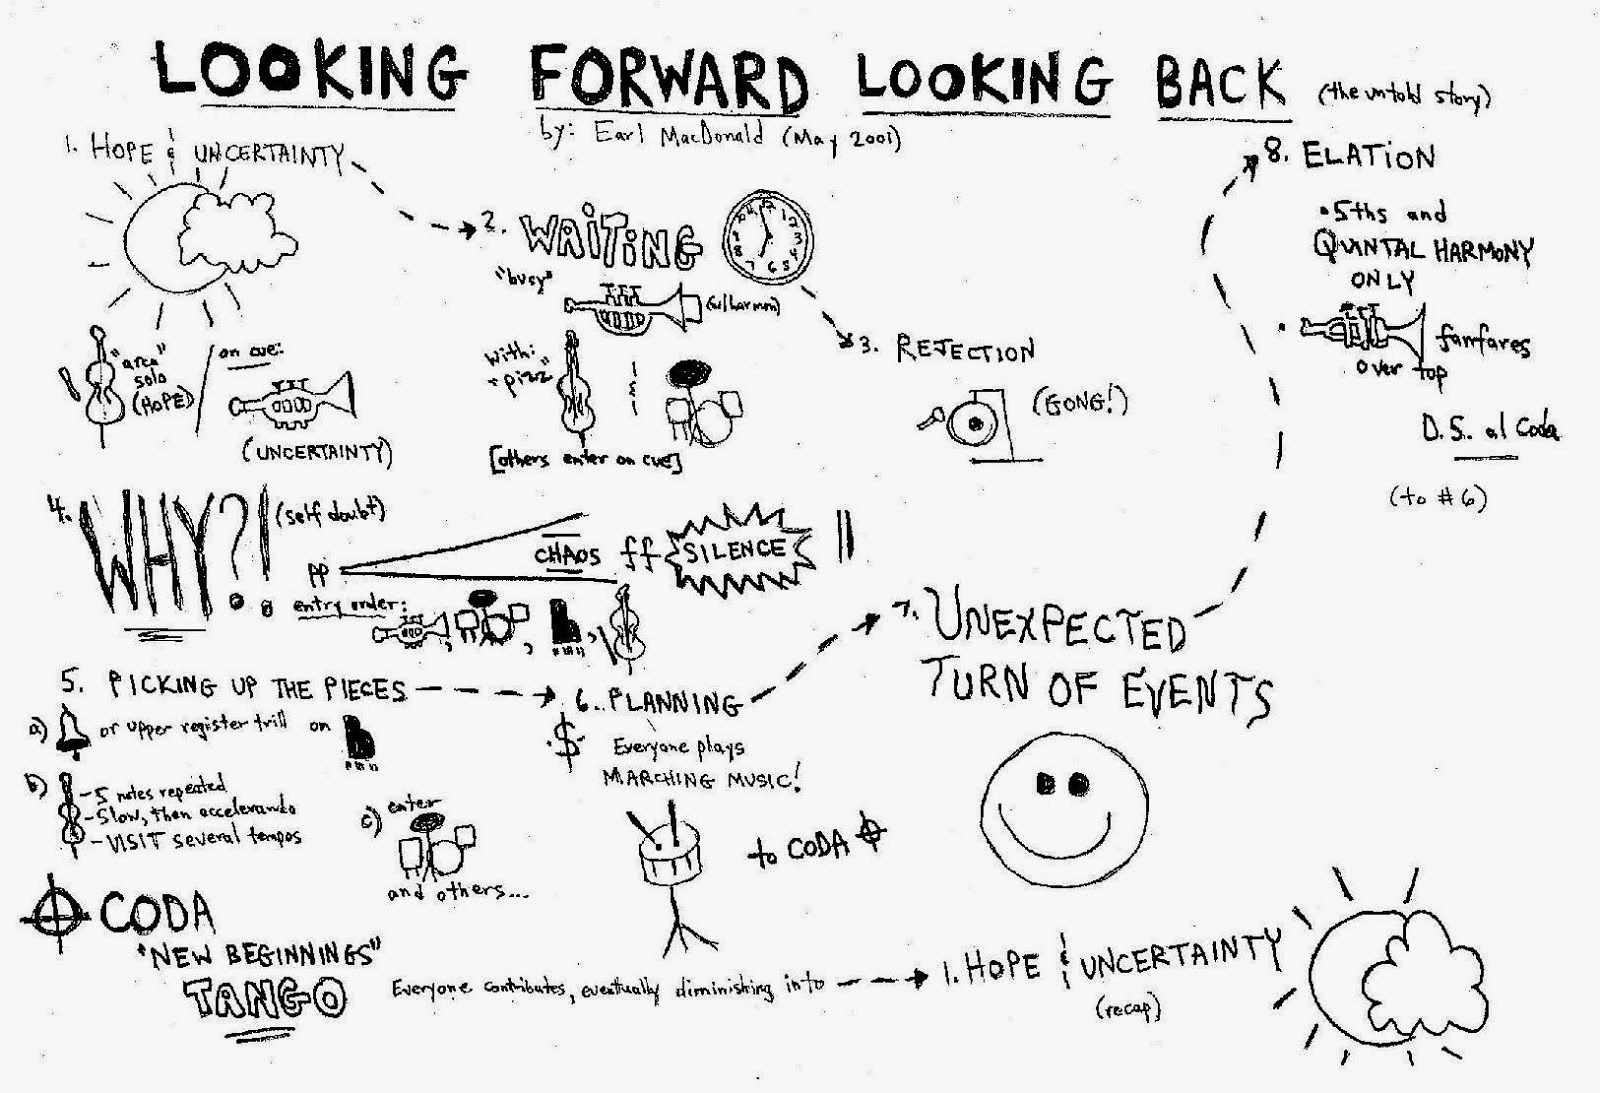 An example of guided free improvisation: "Looking Forward, Looking Back," by Earl MacDonald